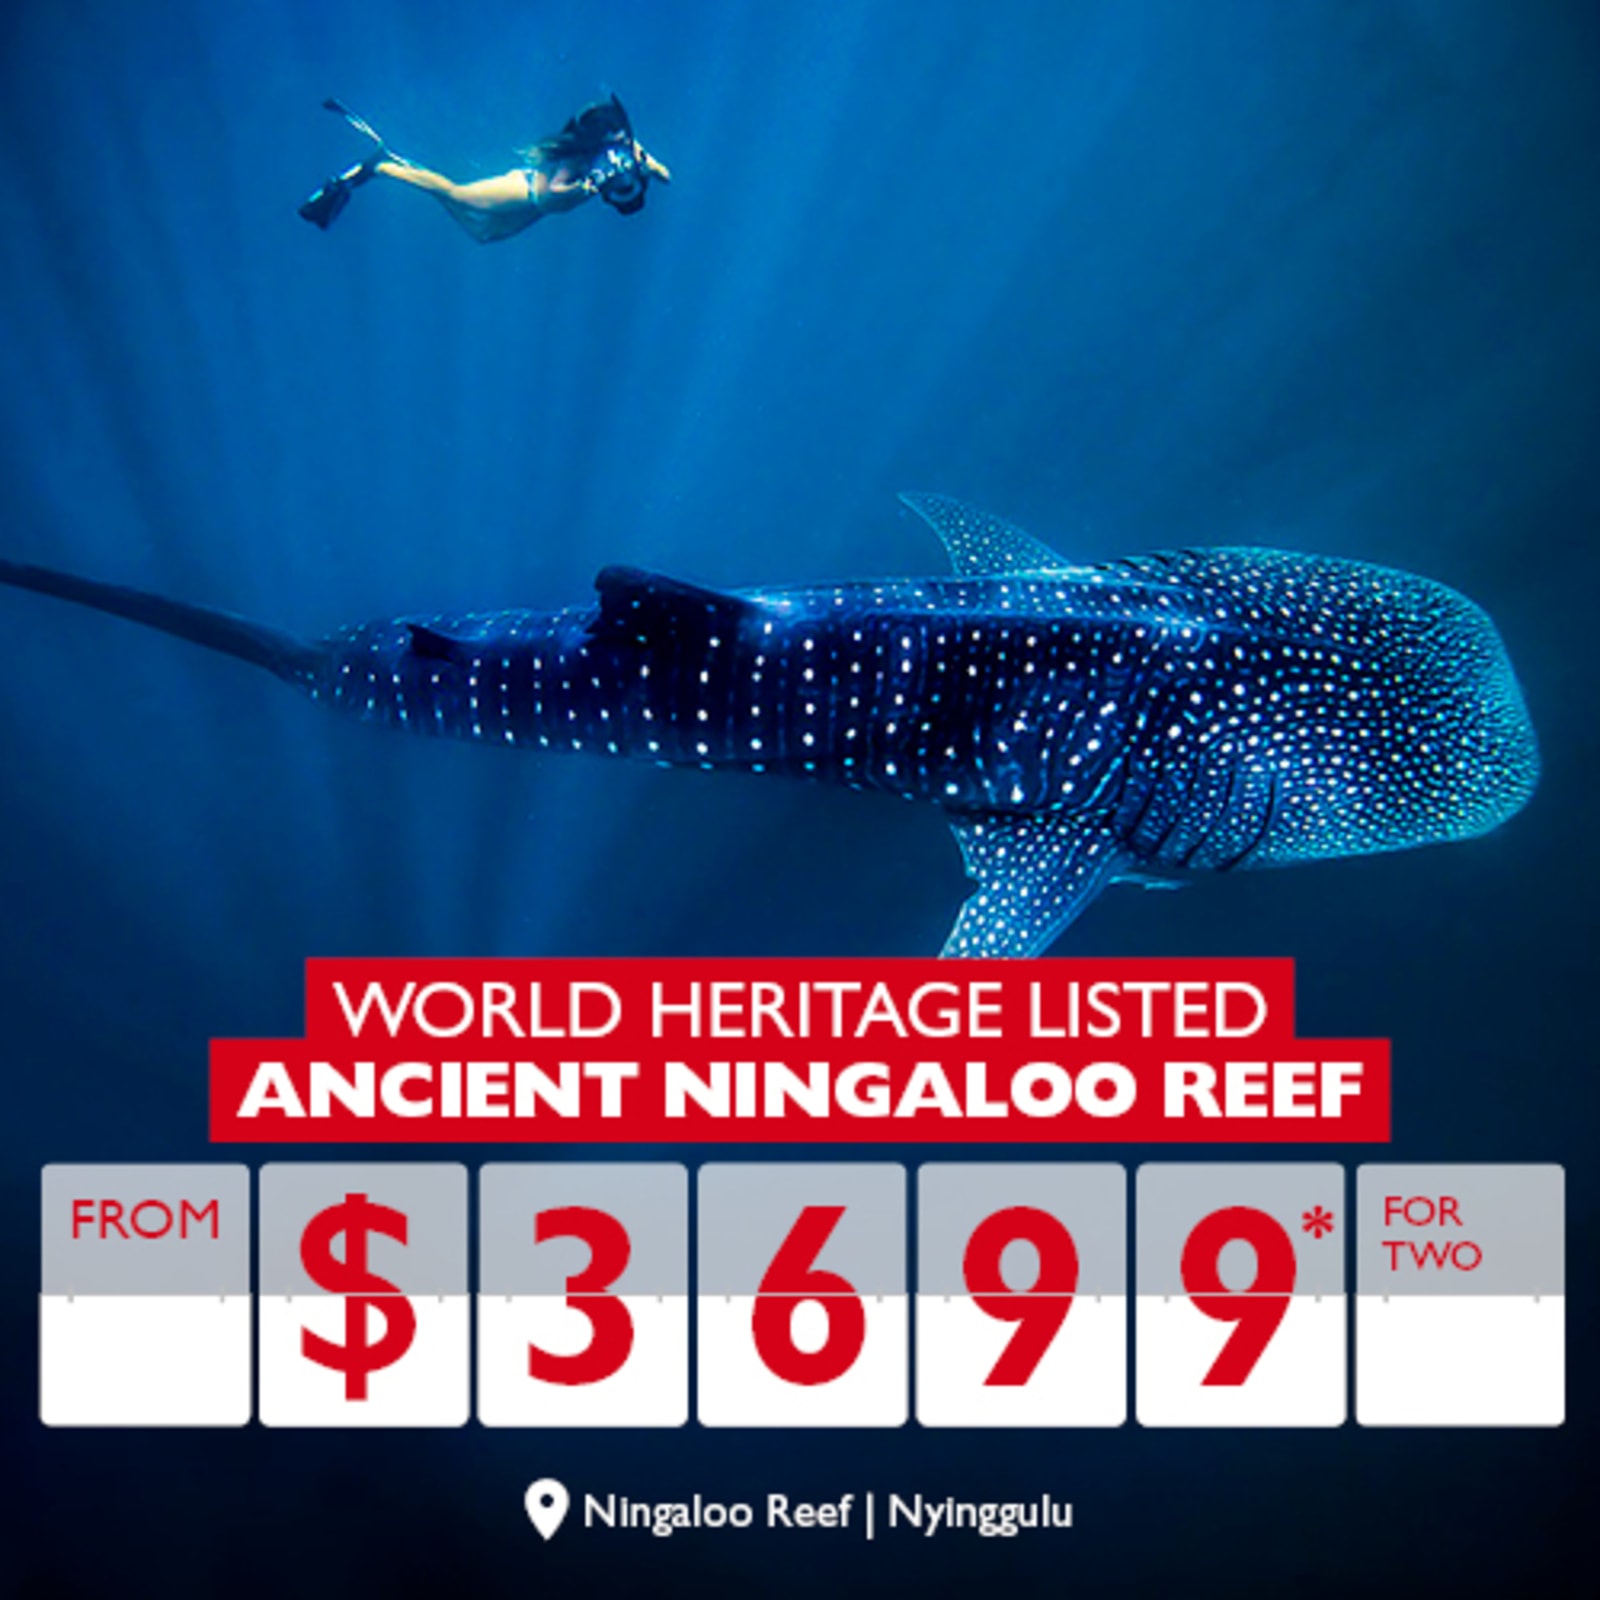 World heritage listed | Ancient Ningaloo Reef from $3699* for two